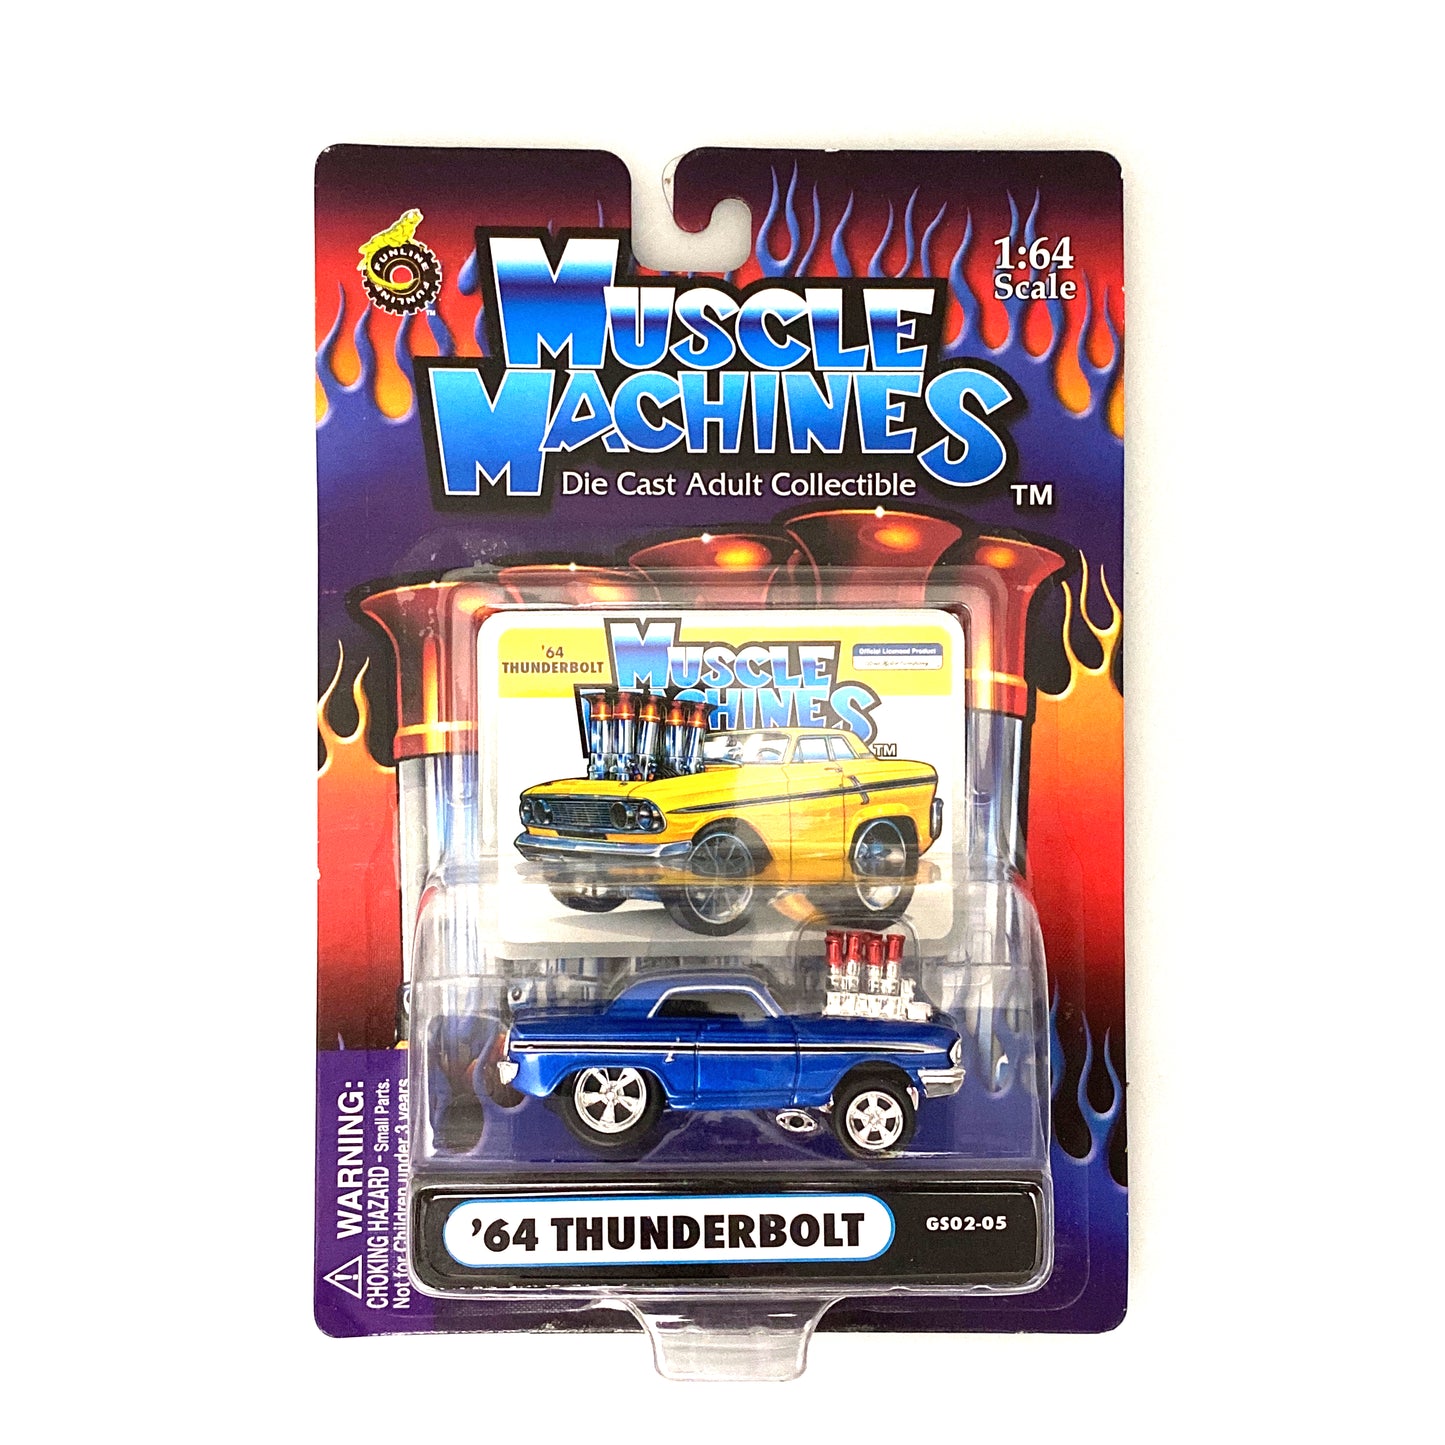 Muscle Machines '64 Thunderbolt Blue Diecast Collectible Car 1:64 Scale Model #GS02-05